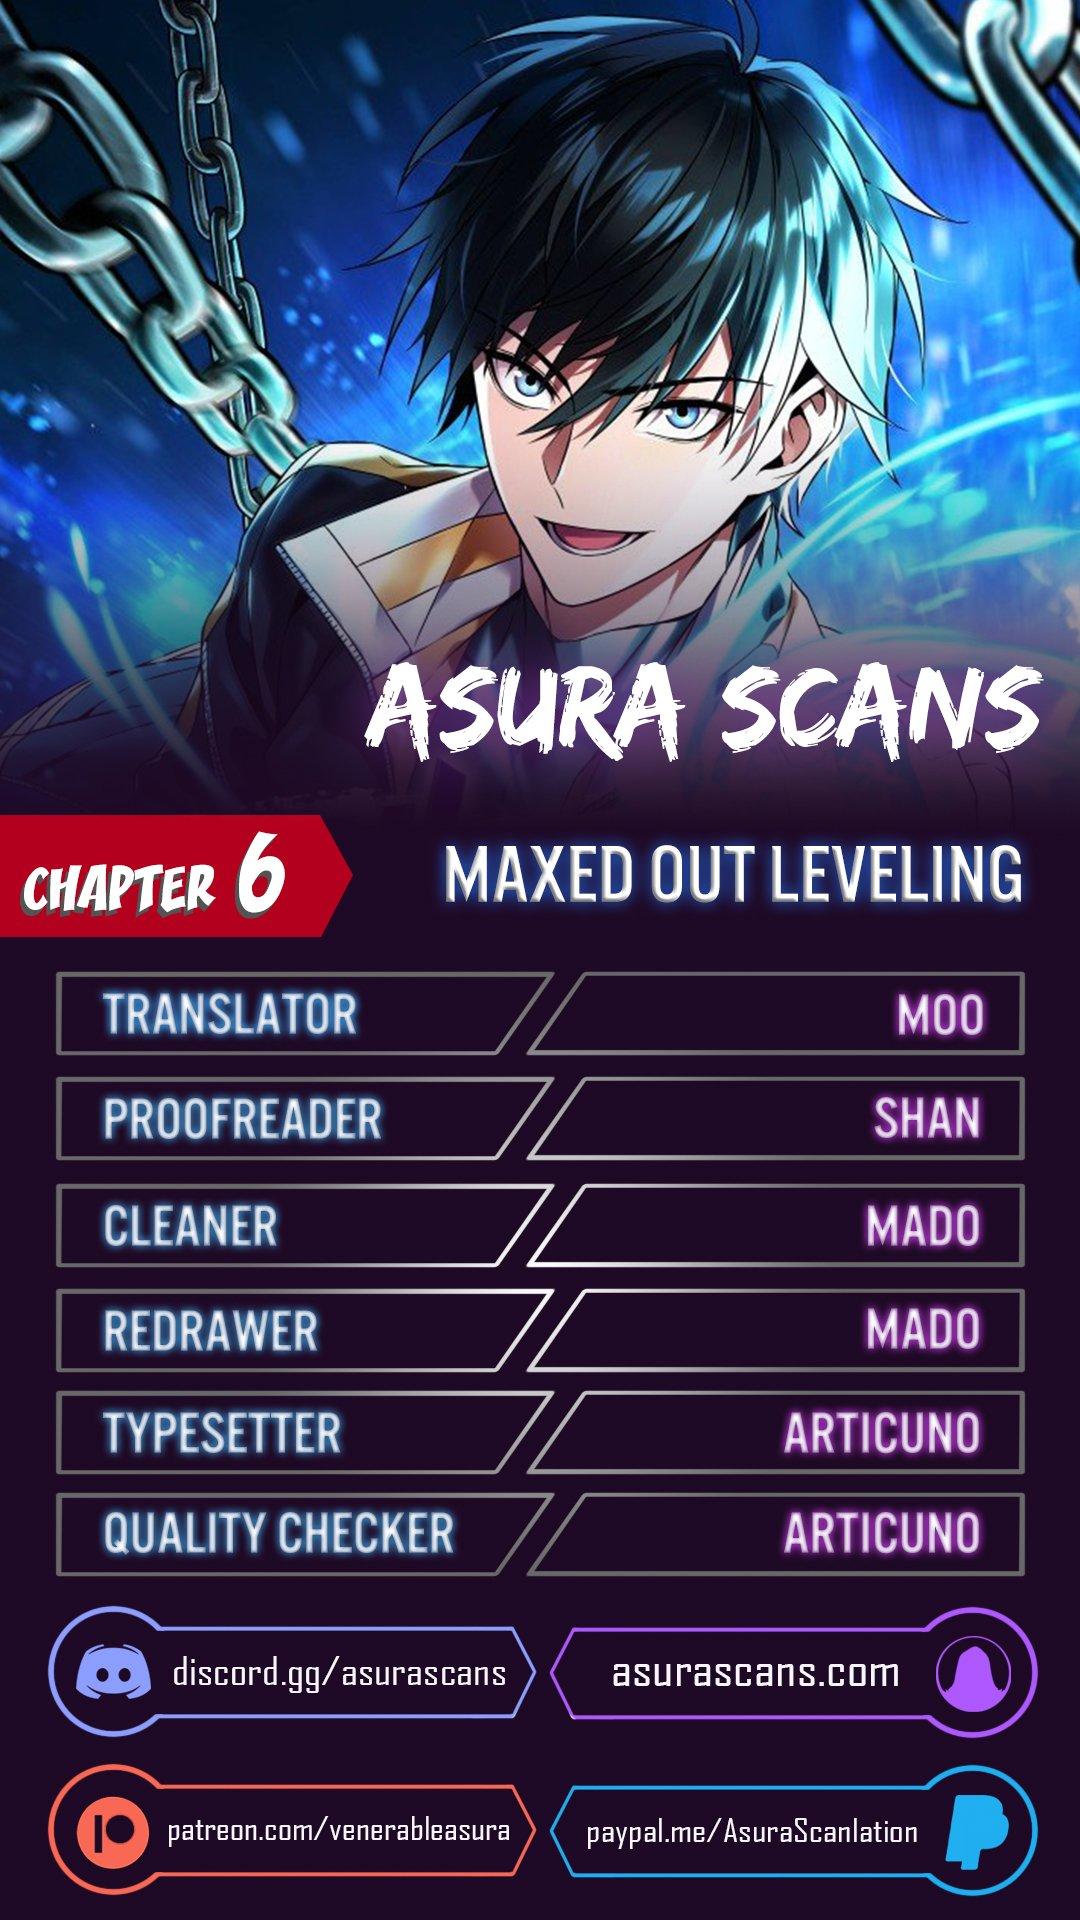 Read Max Level Player Chapter 6 - Manganelo